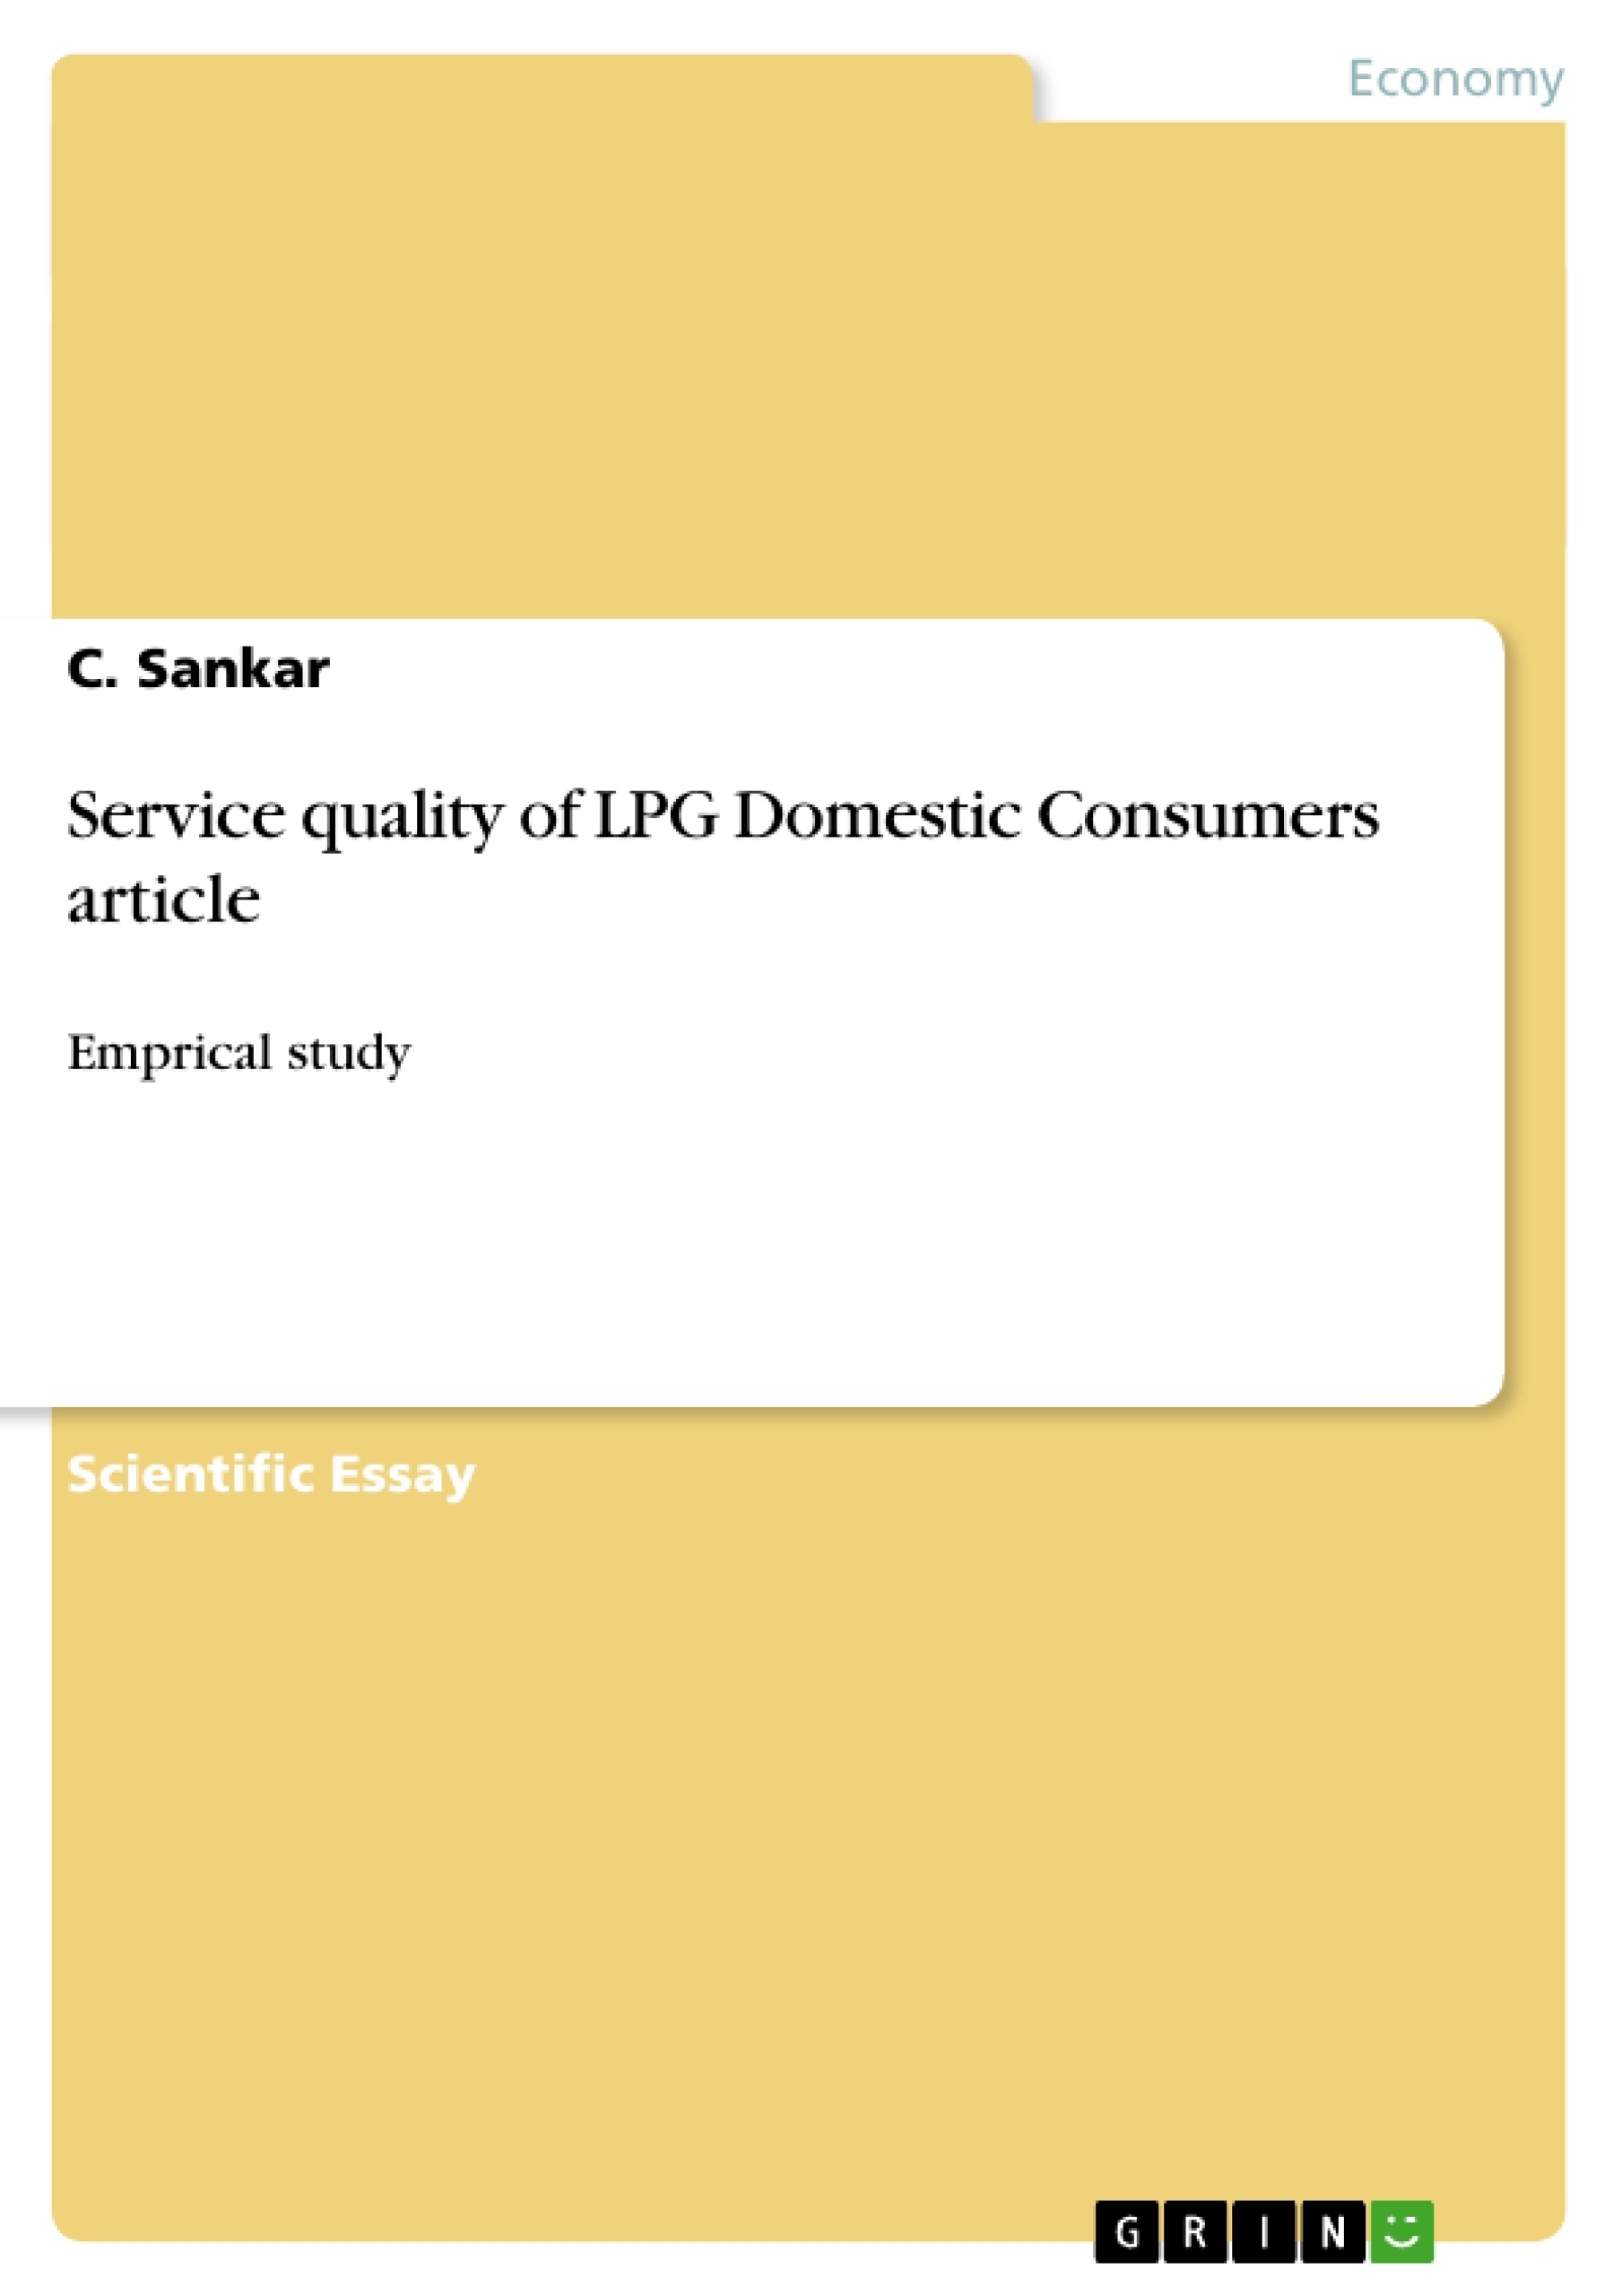 Title: Service quality of LPG Domestic Consumers article